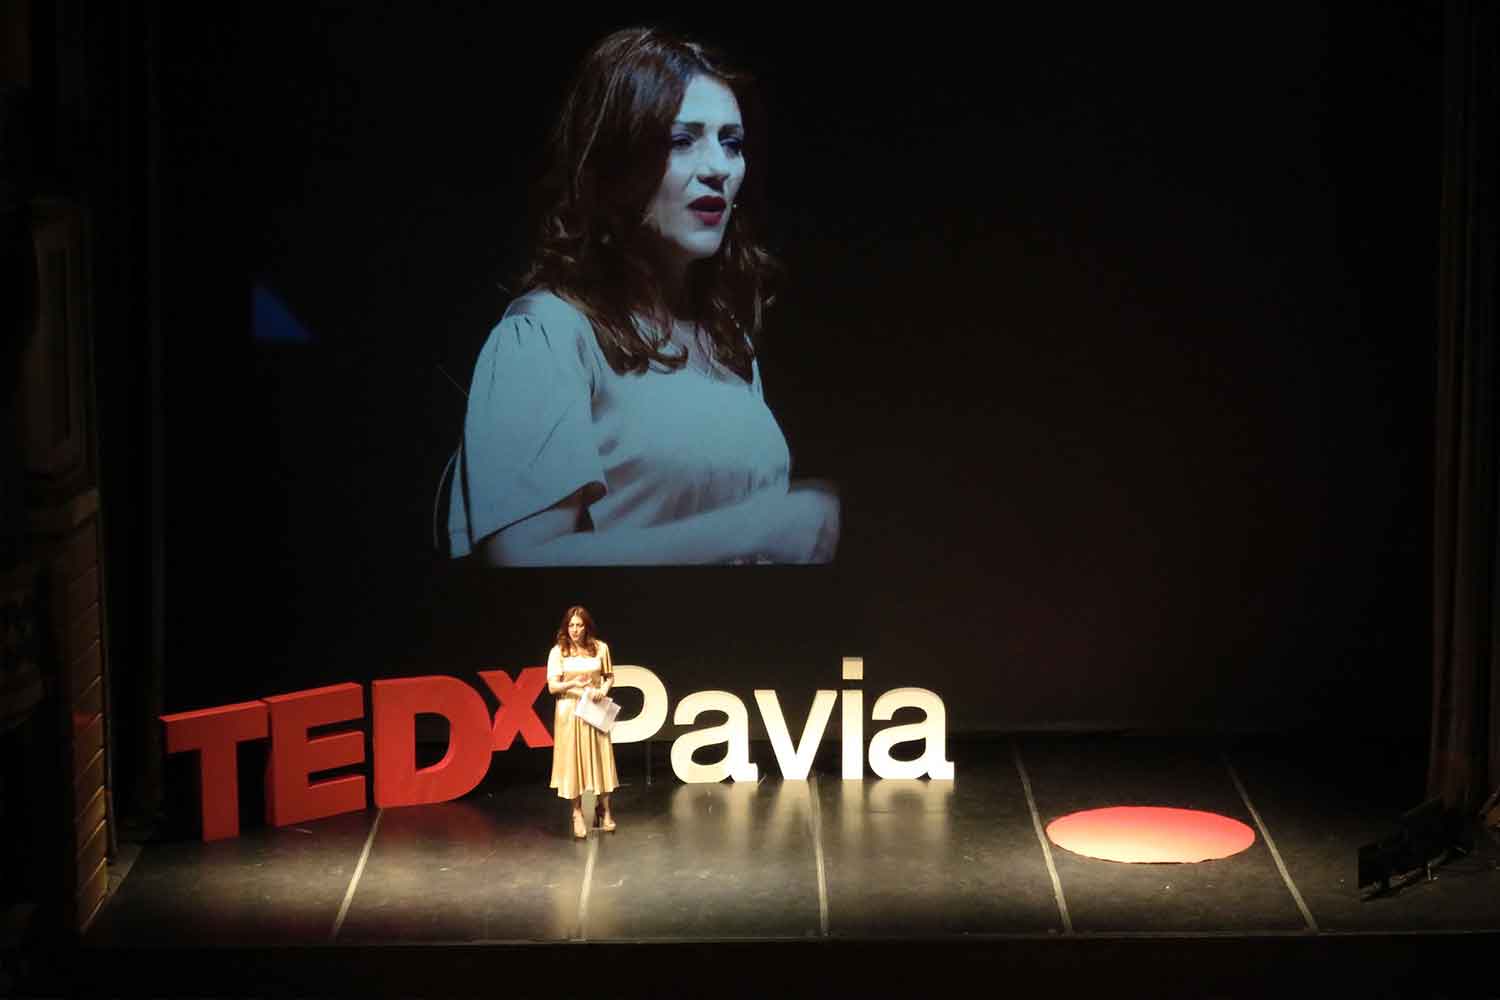 woman speaking at tedx pavia